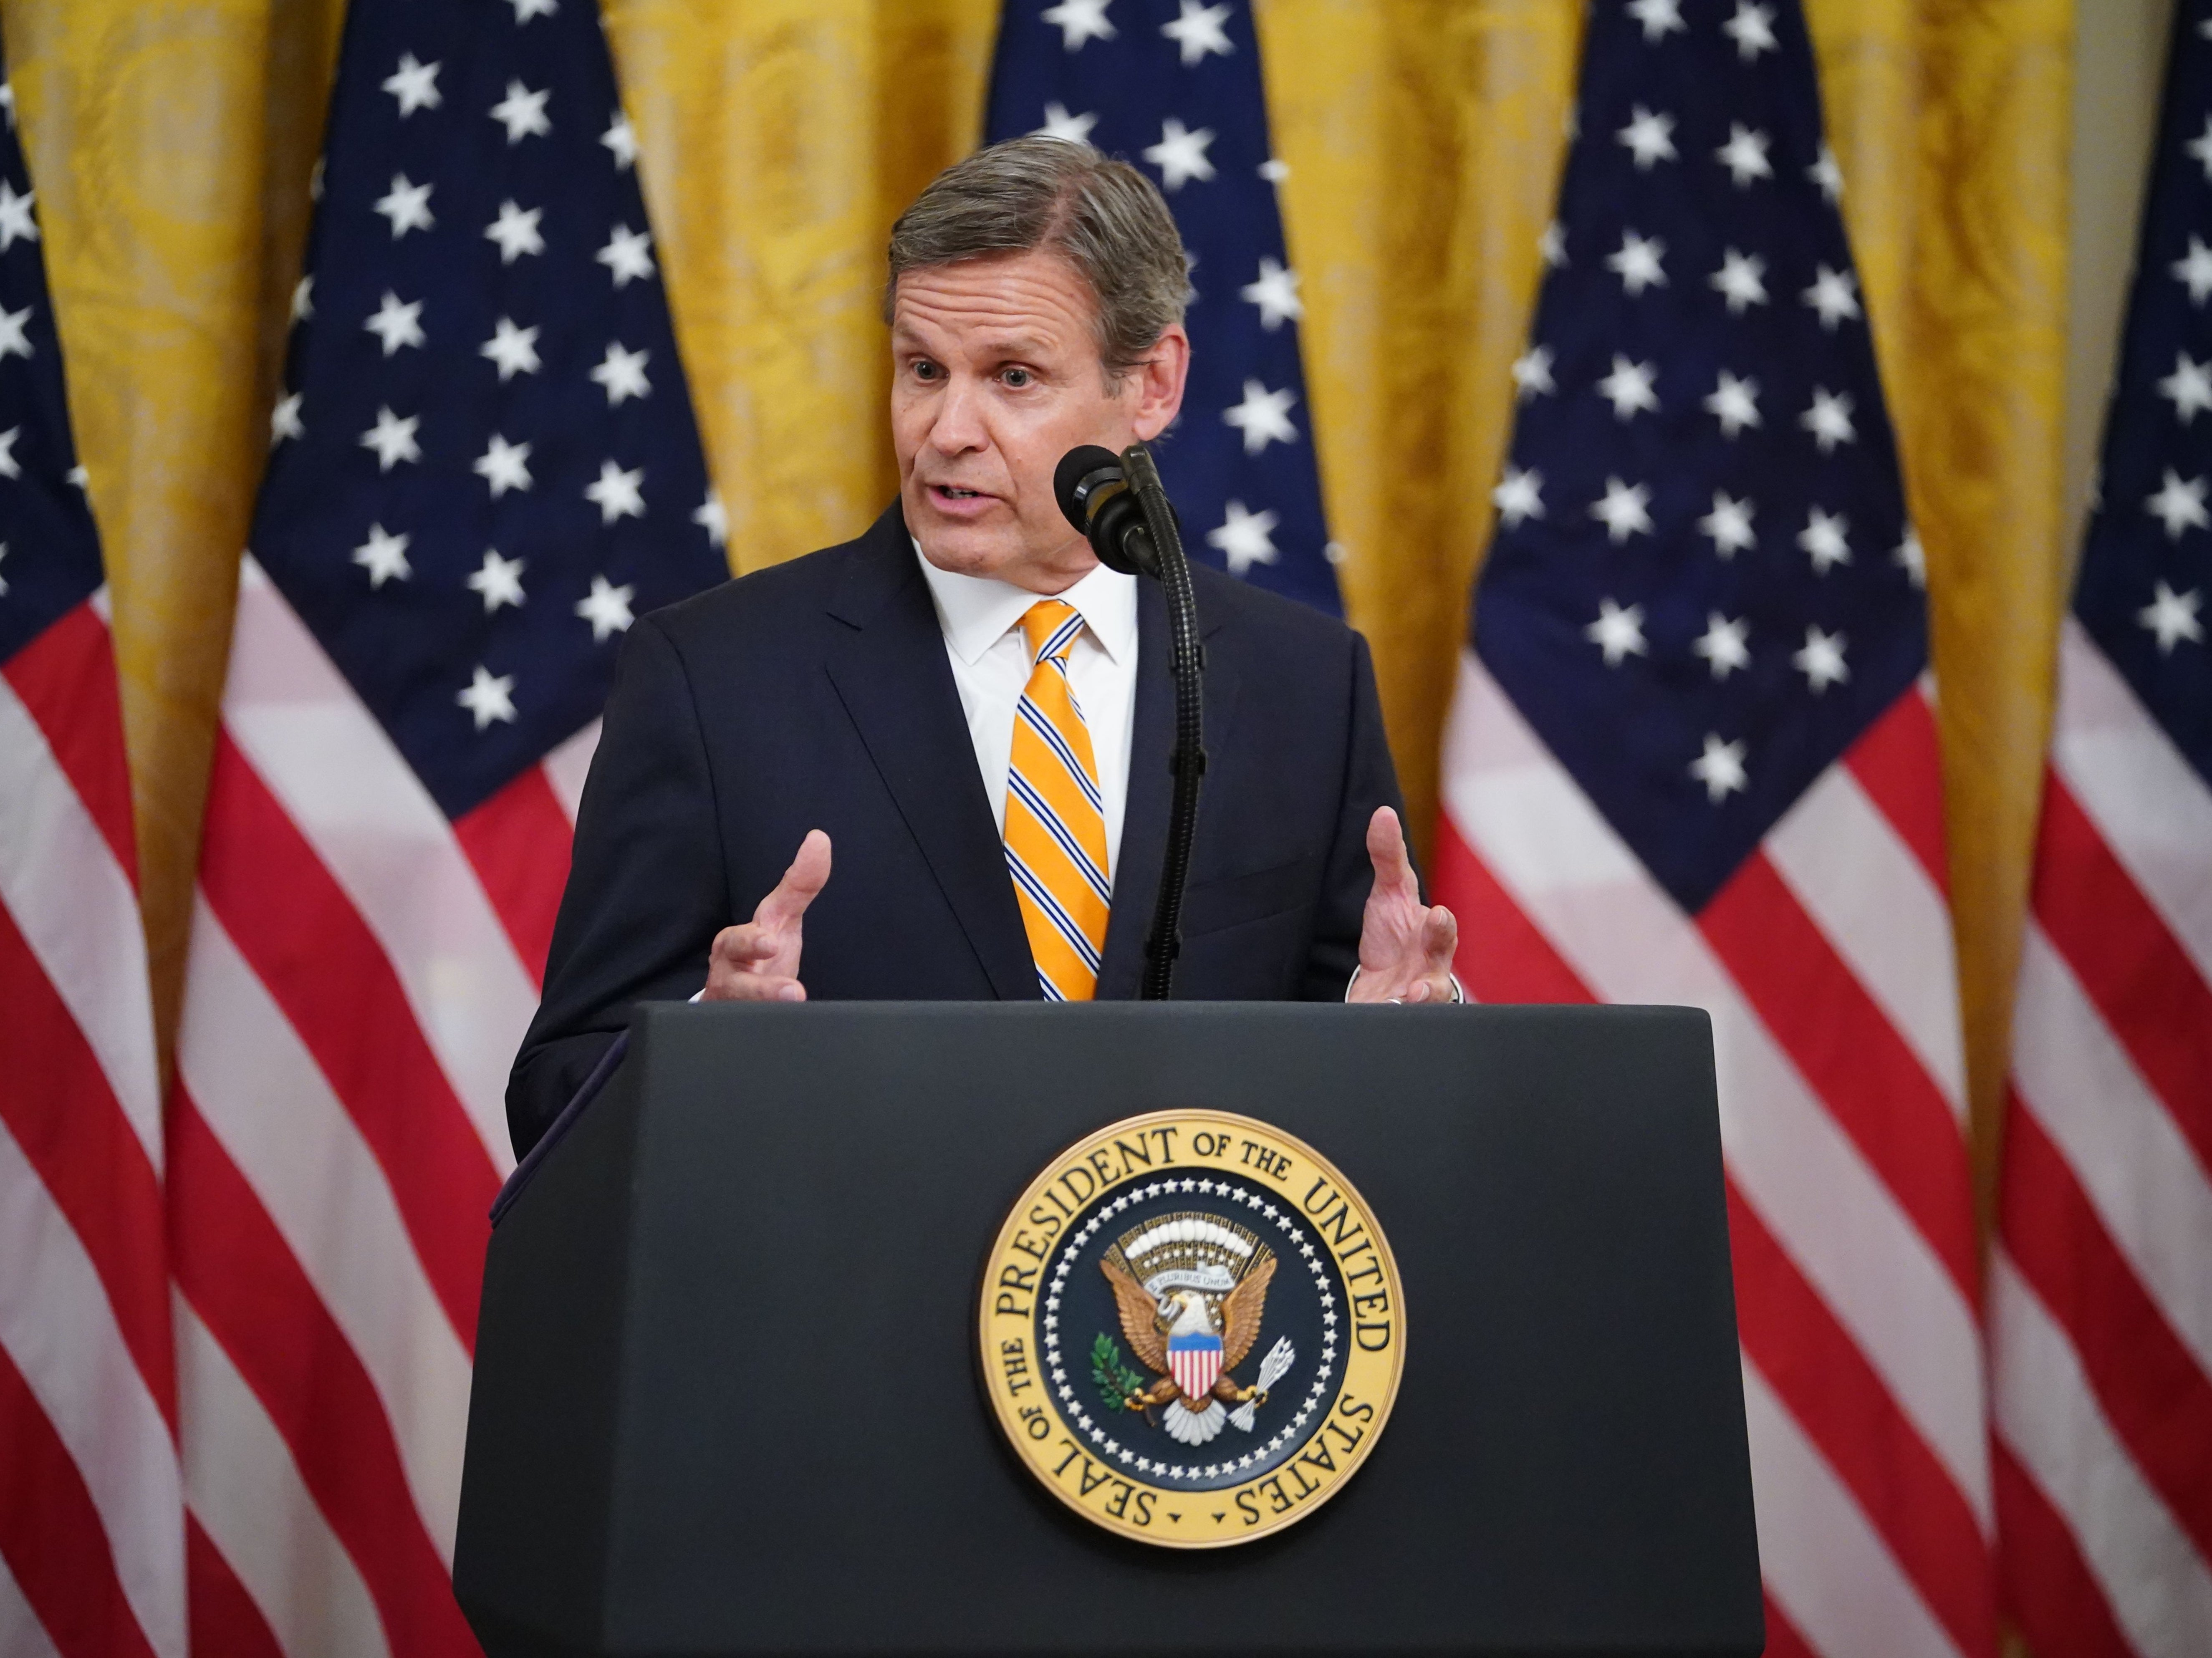 Tennessee Governor Bill Lee speaks on 30 April 2020 at the White House in Washington, DC